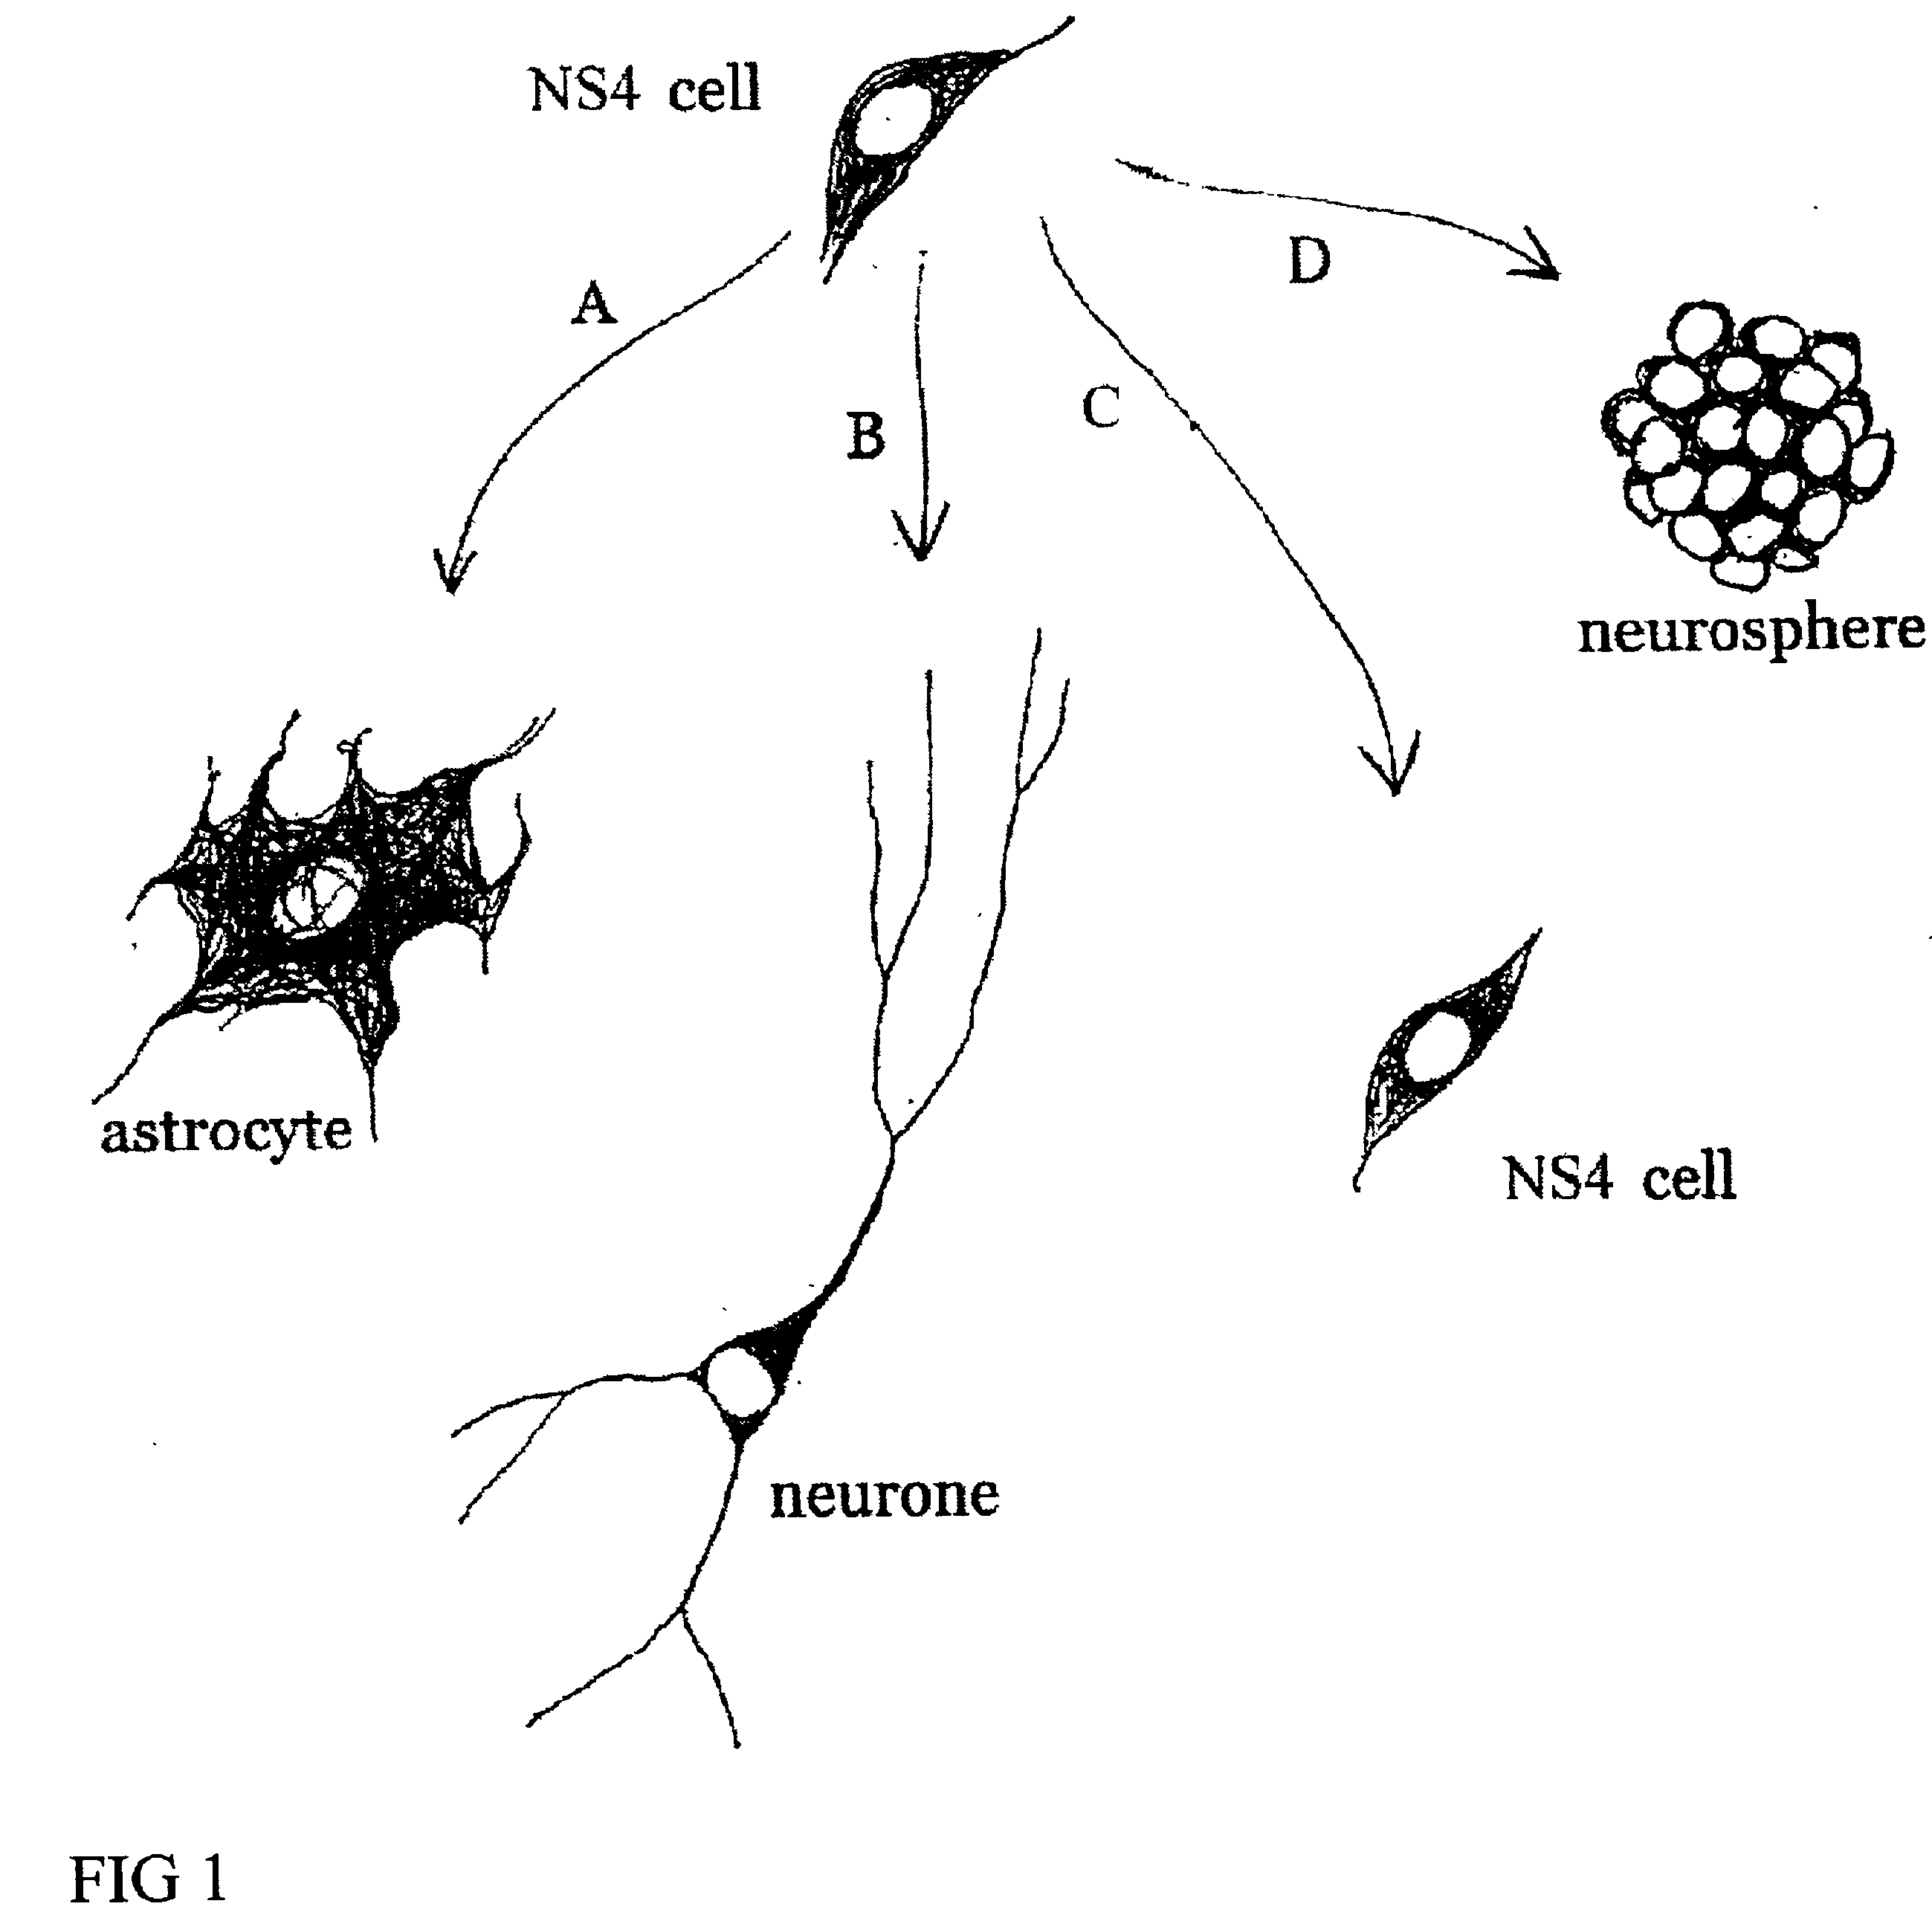 Cultures of GFAP+ nestin+ cells that differentiate to neurons